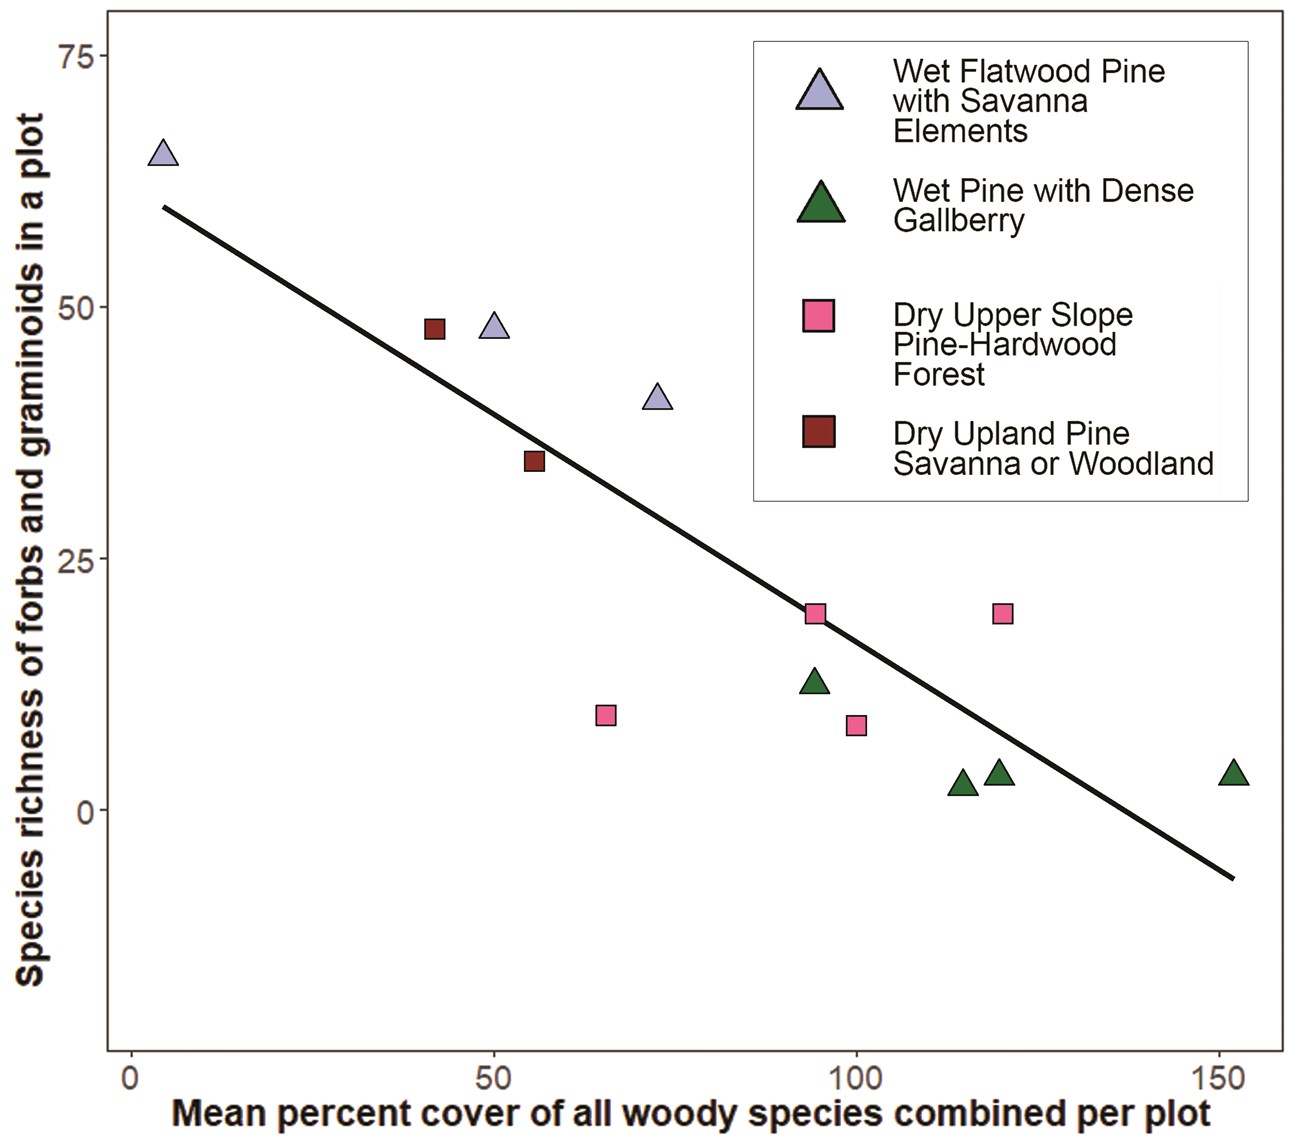 Figure showing the negative relationship between percent cover of woody plants and species richness in graminoids and forbs